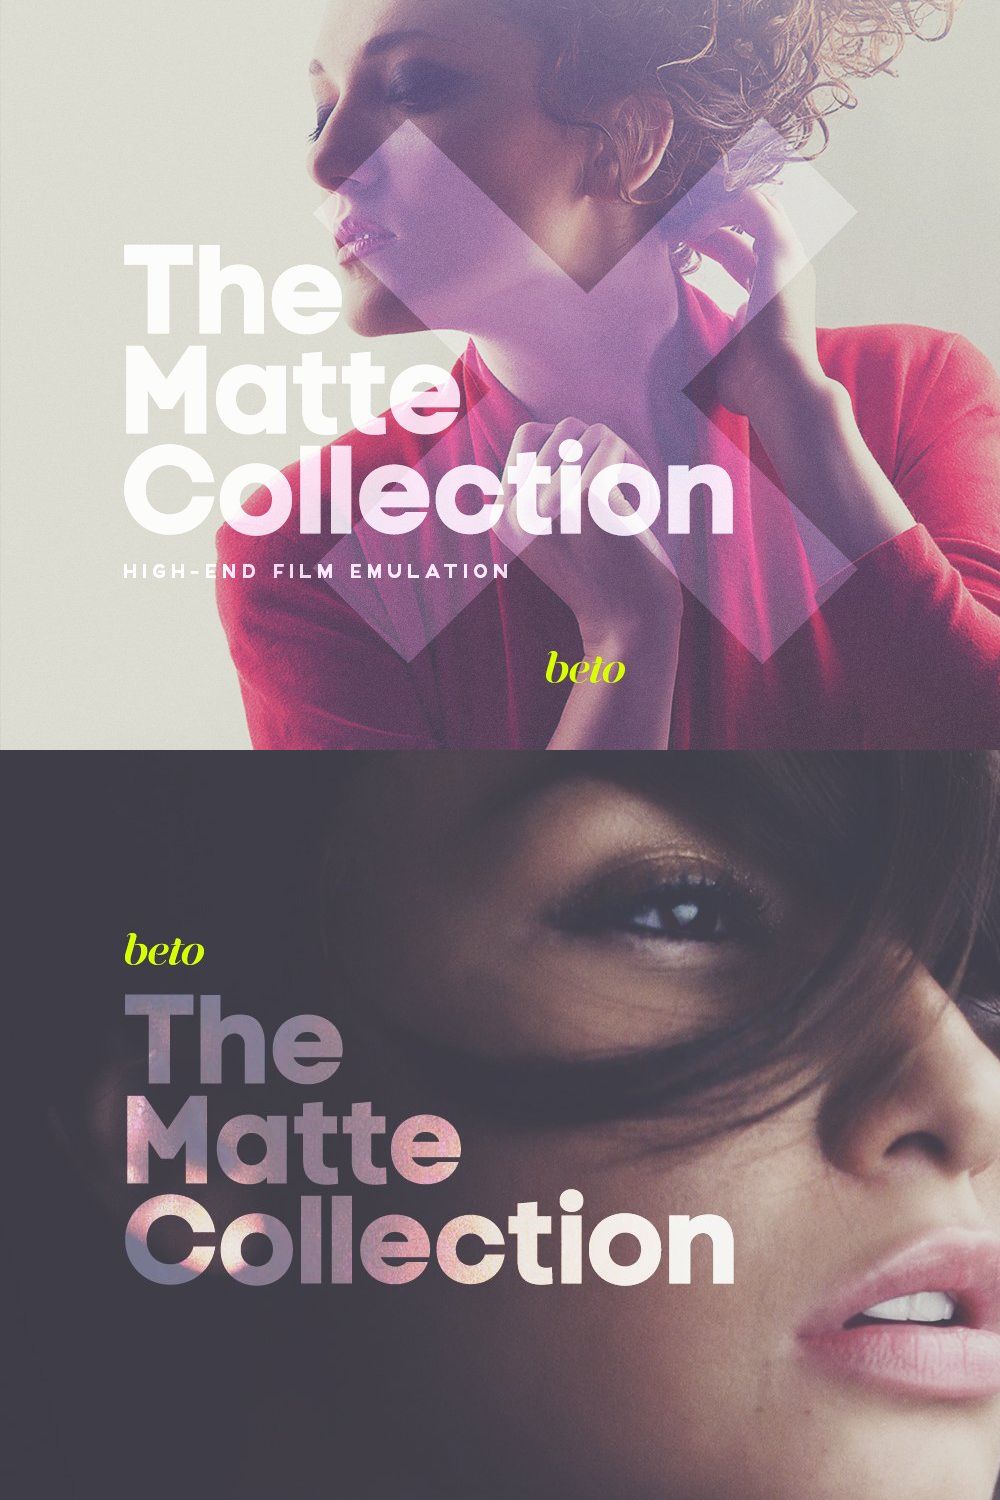 The Matte Collection pinterest preview image.